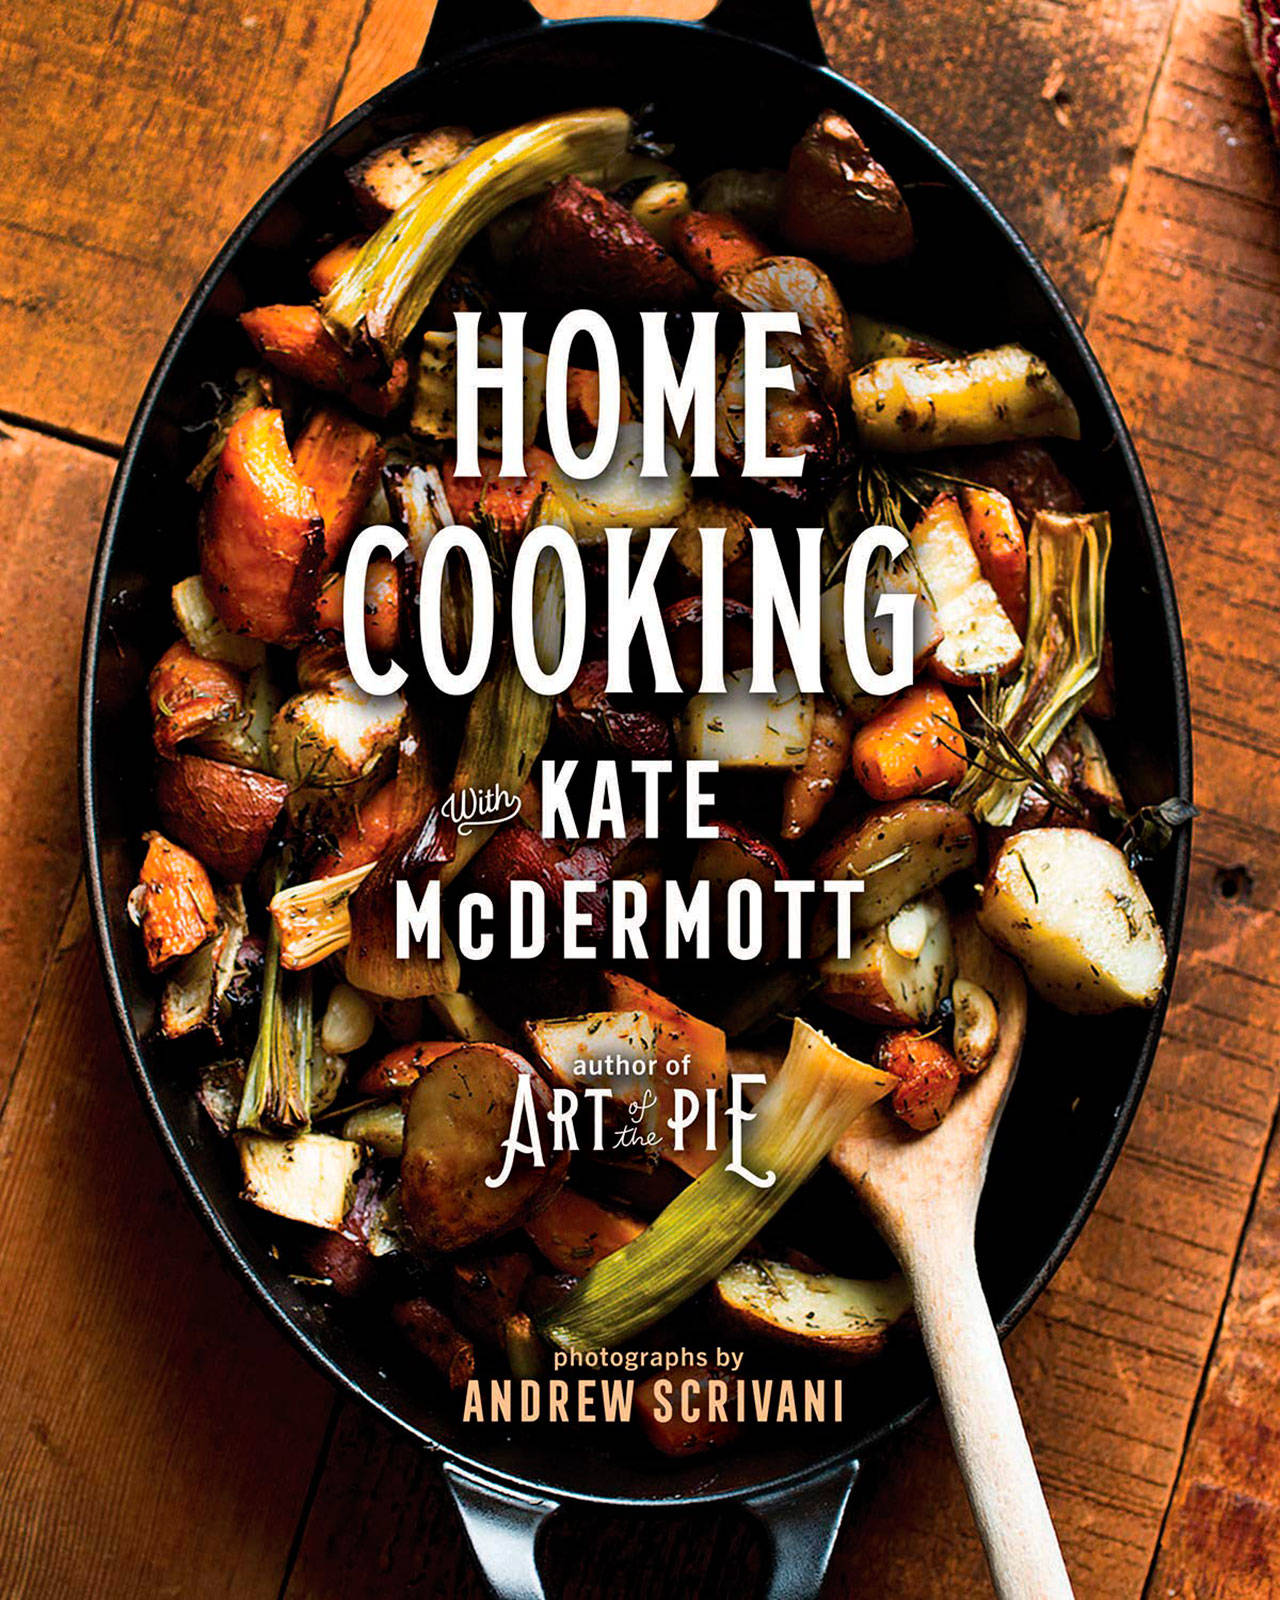 Imager courtesy of Eagle Harbor Book Company | The author of the hit debut cookbook “Art of the Pie” is coming back to Eagle Harbor Book Company at 3 p.m. Sunday, Jan. 6 at 3pm with a host of satisfying, mainly one-dish meals in her latest culinary tome: “Home Cooking with Kate McDermott.”